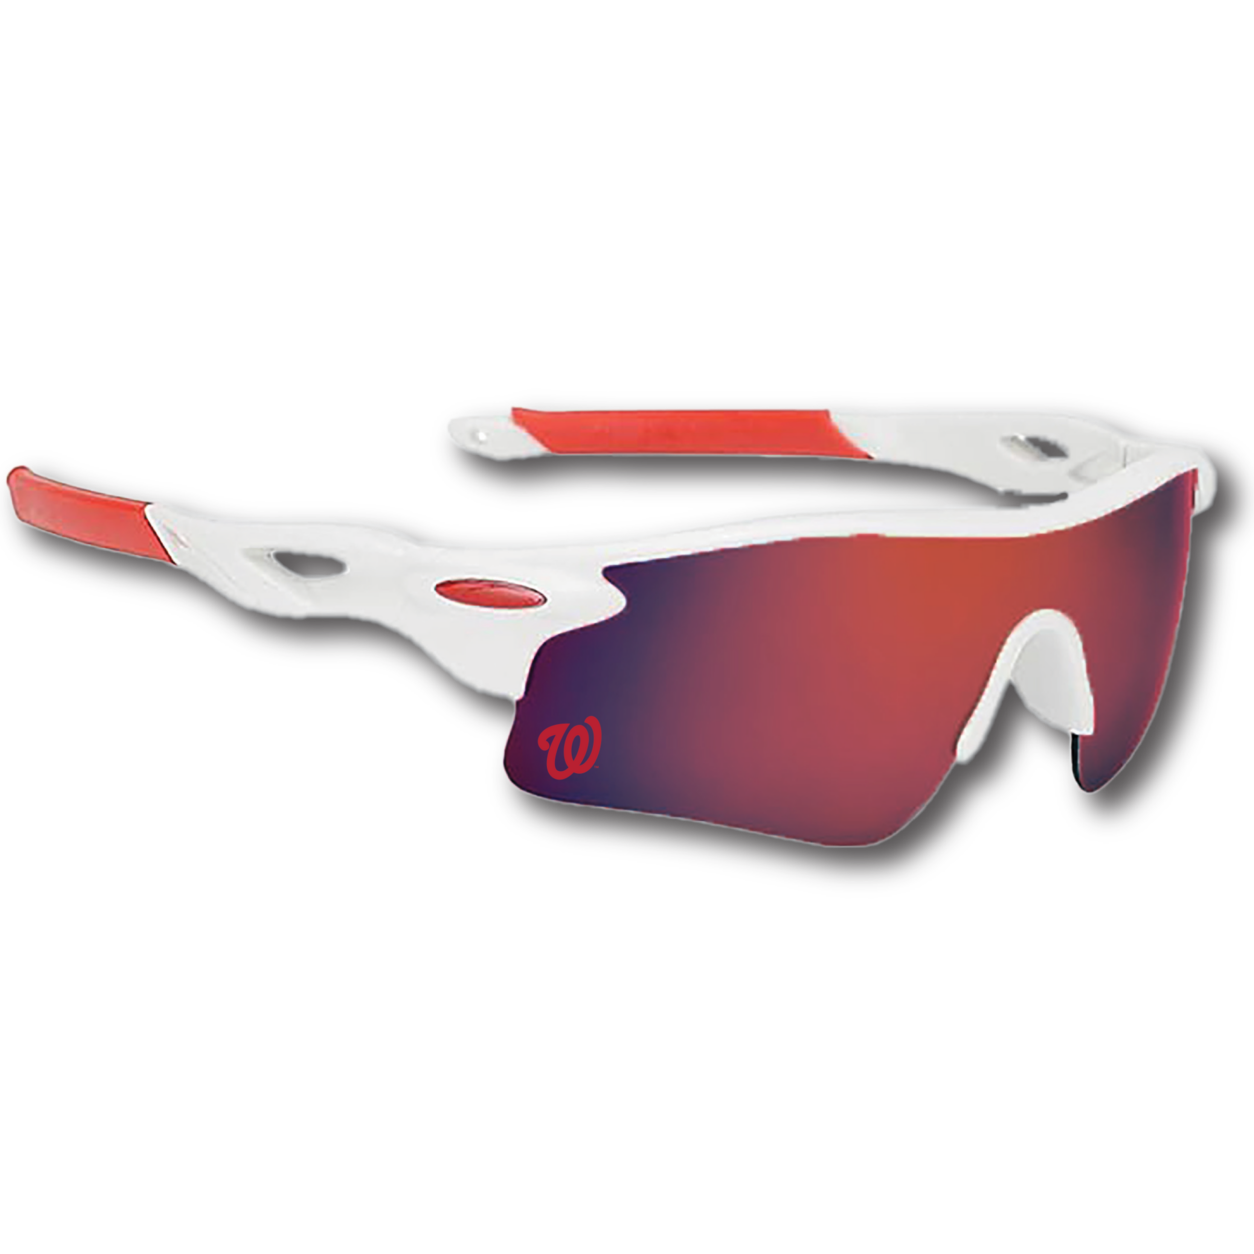 Nationals All-Star Sunglasses